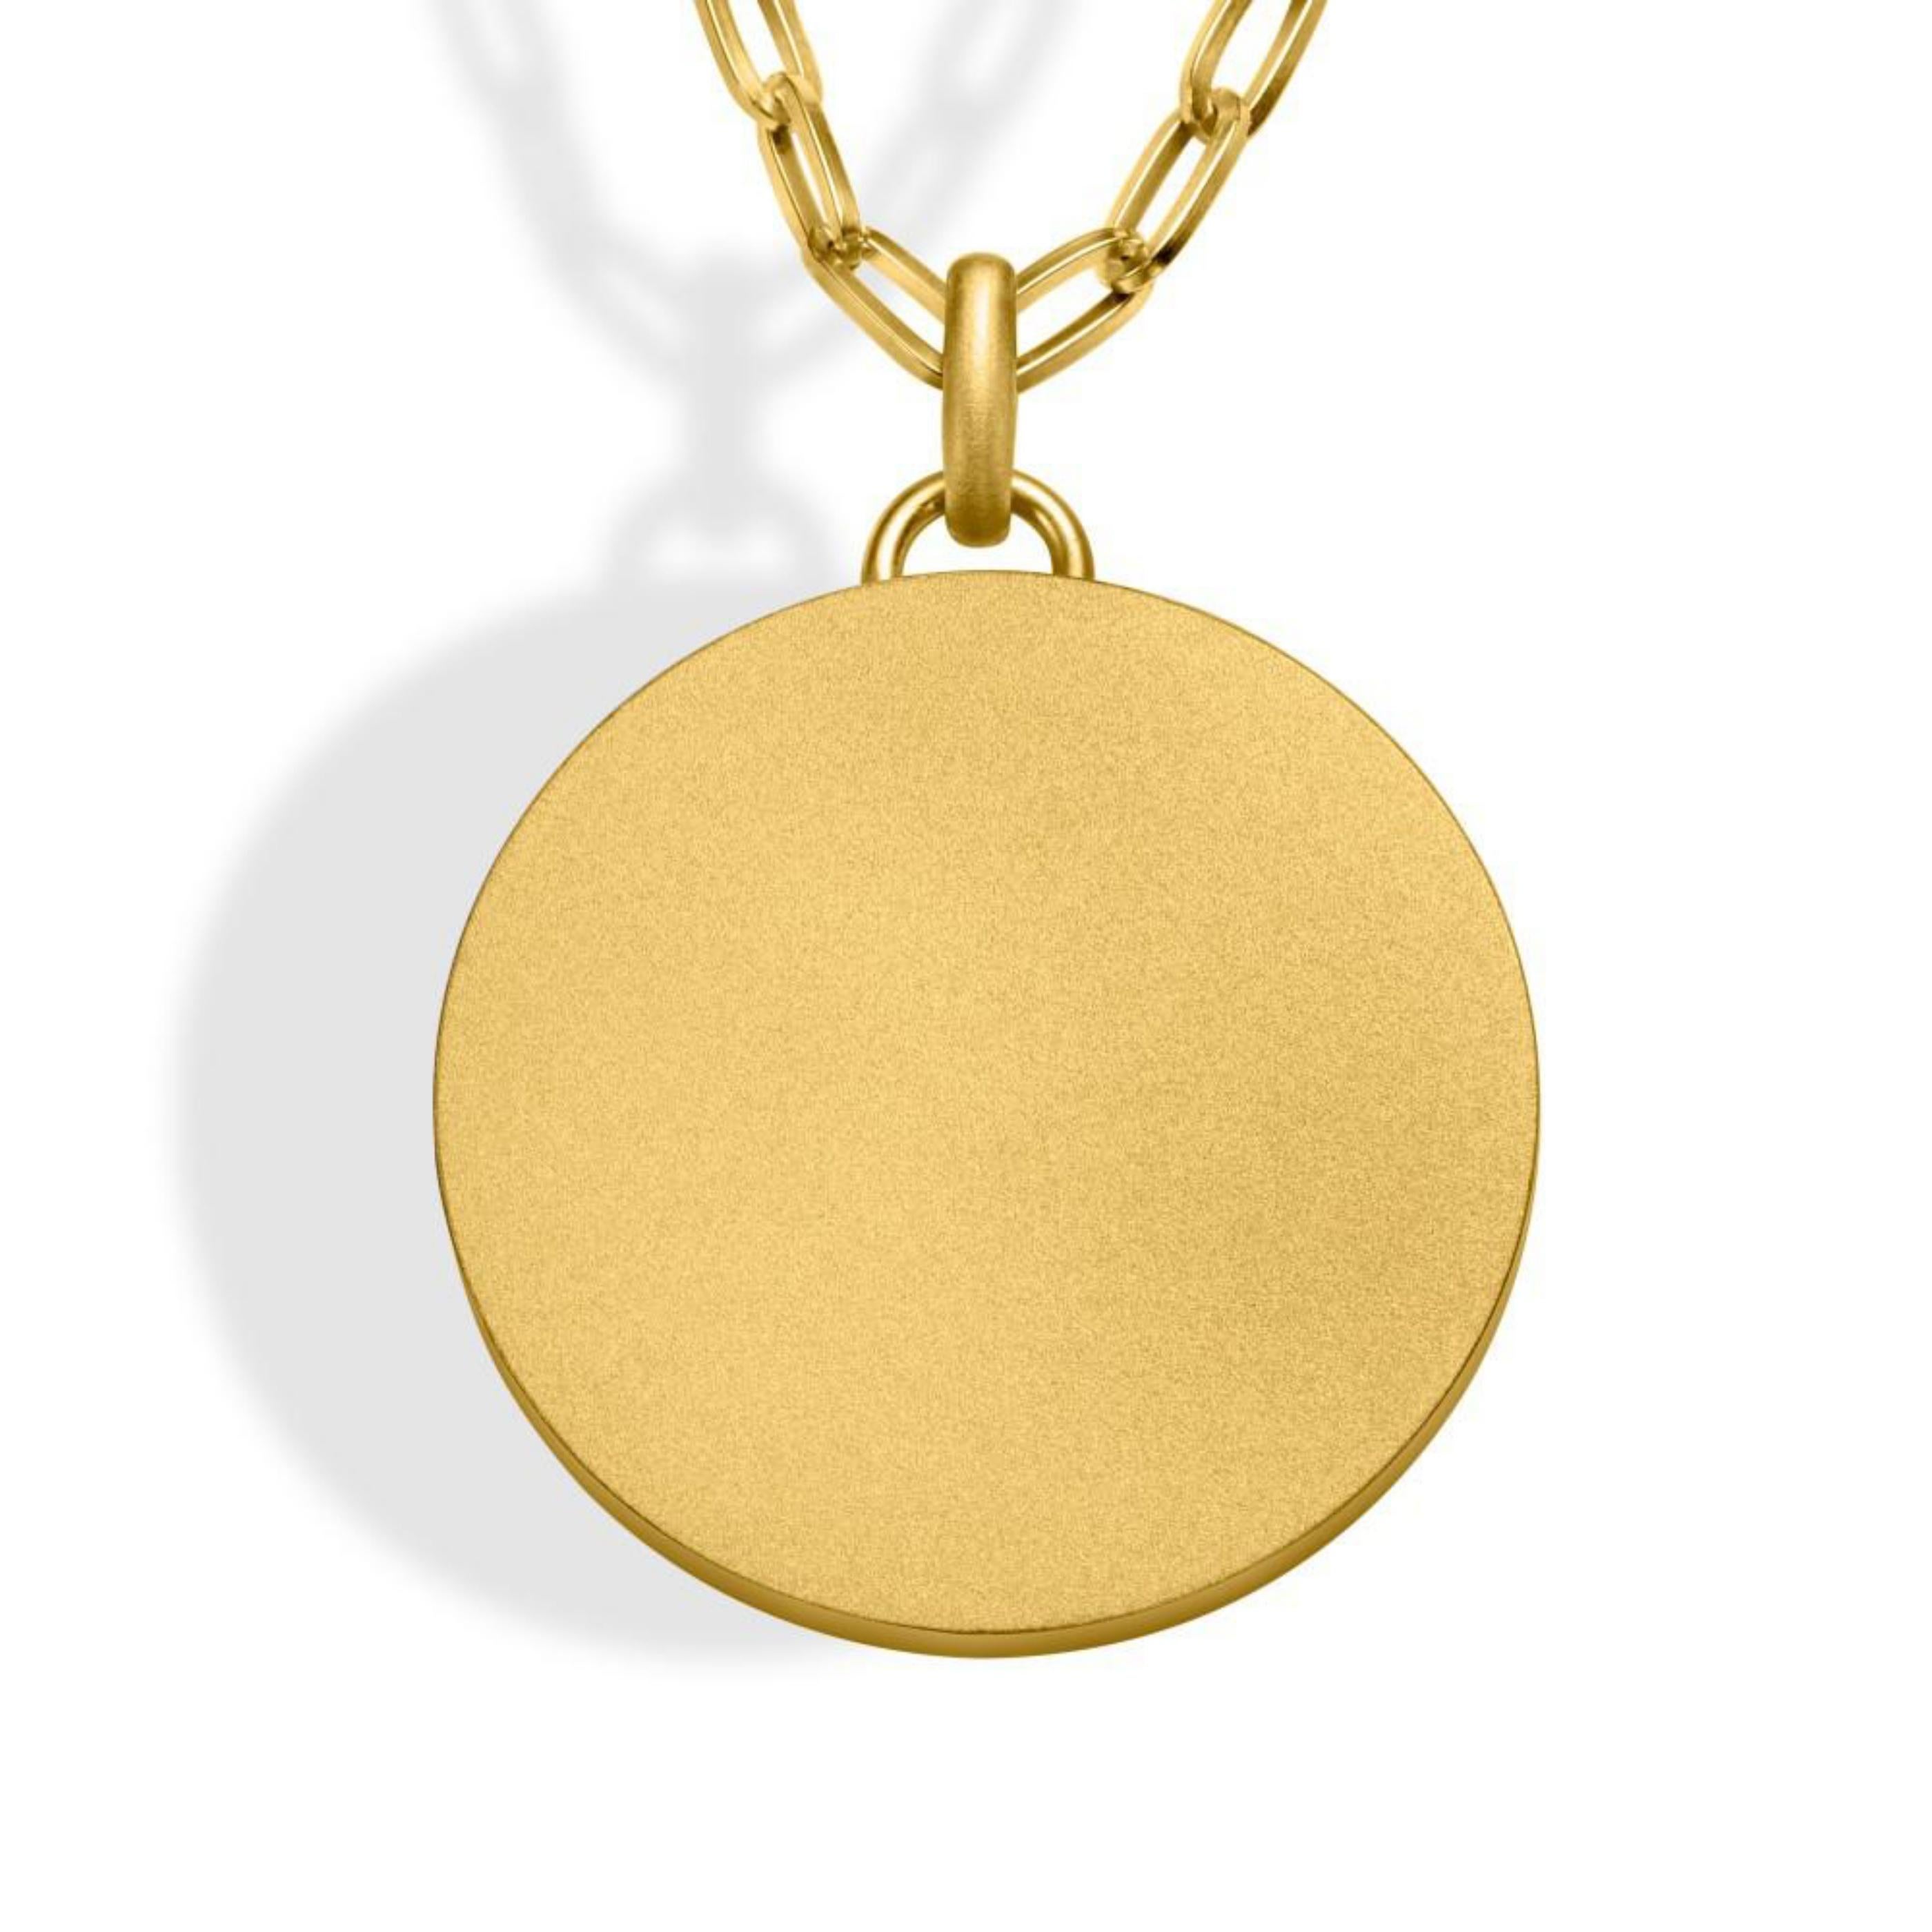 Sky - Limited Edition Gold Plated Bronze Sculpted Necklace with chain  - Sculpture by Kiki Smith